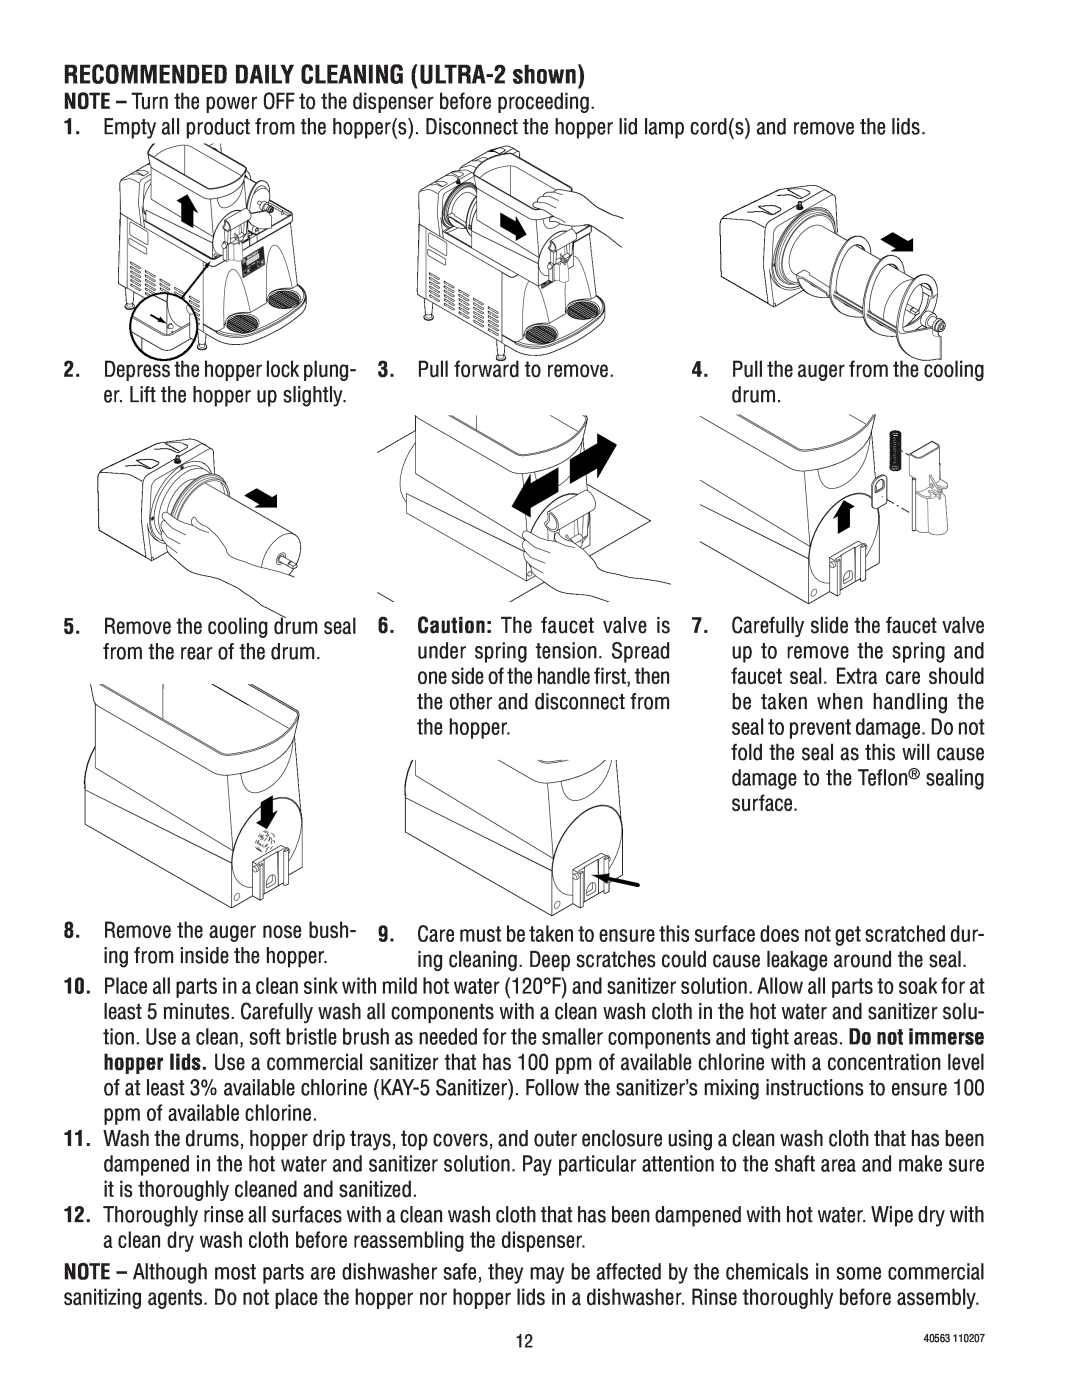 Bunn ULTRA-1, Ultra 2 service manual RECOMMENDED DAILY CLEANING ULTRA-2shown 